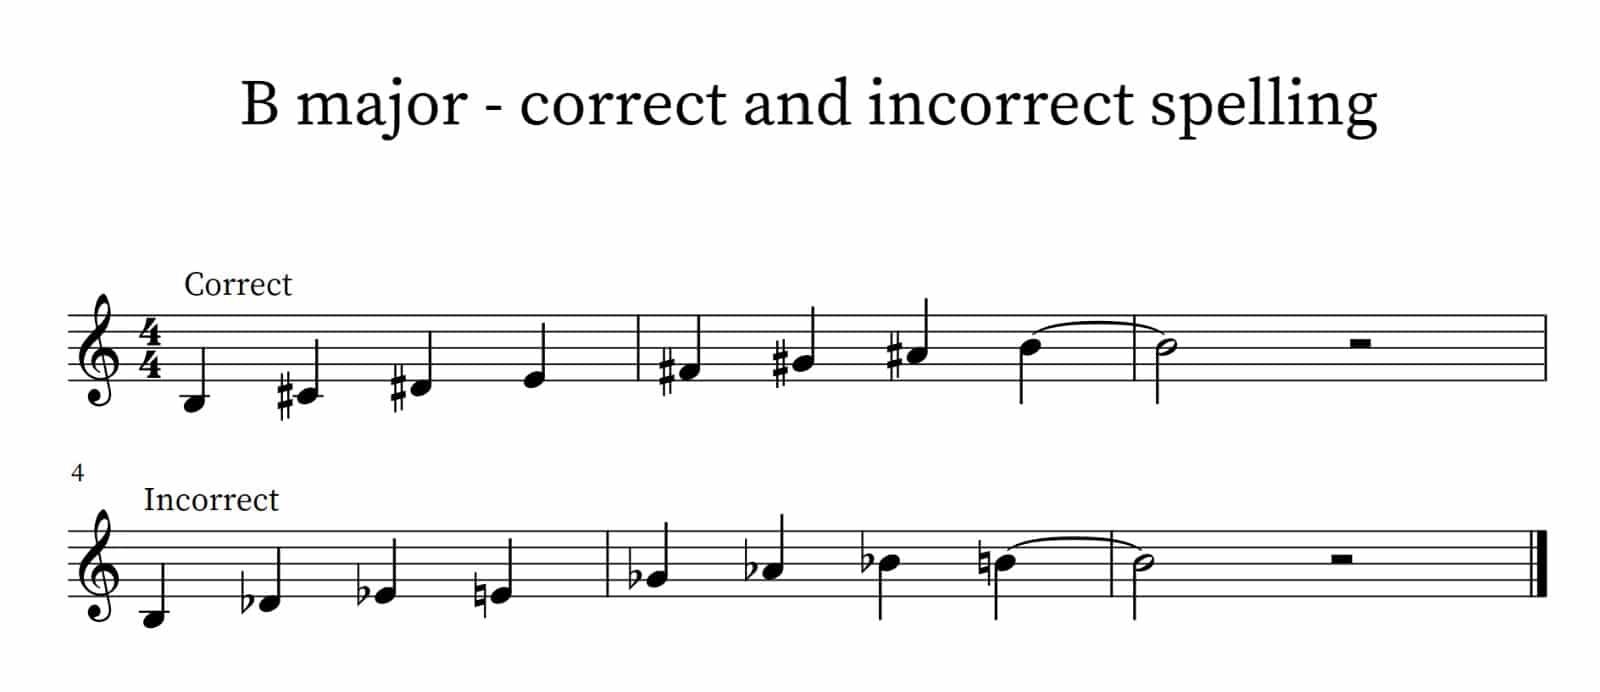 Correct and incorrect ways of spelling a B major scale